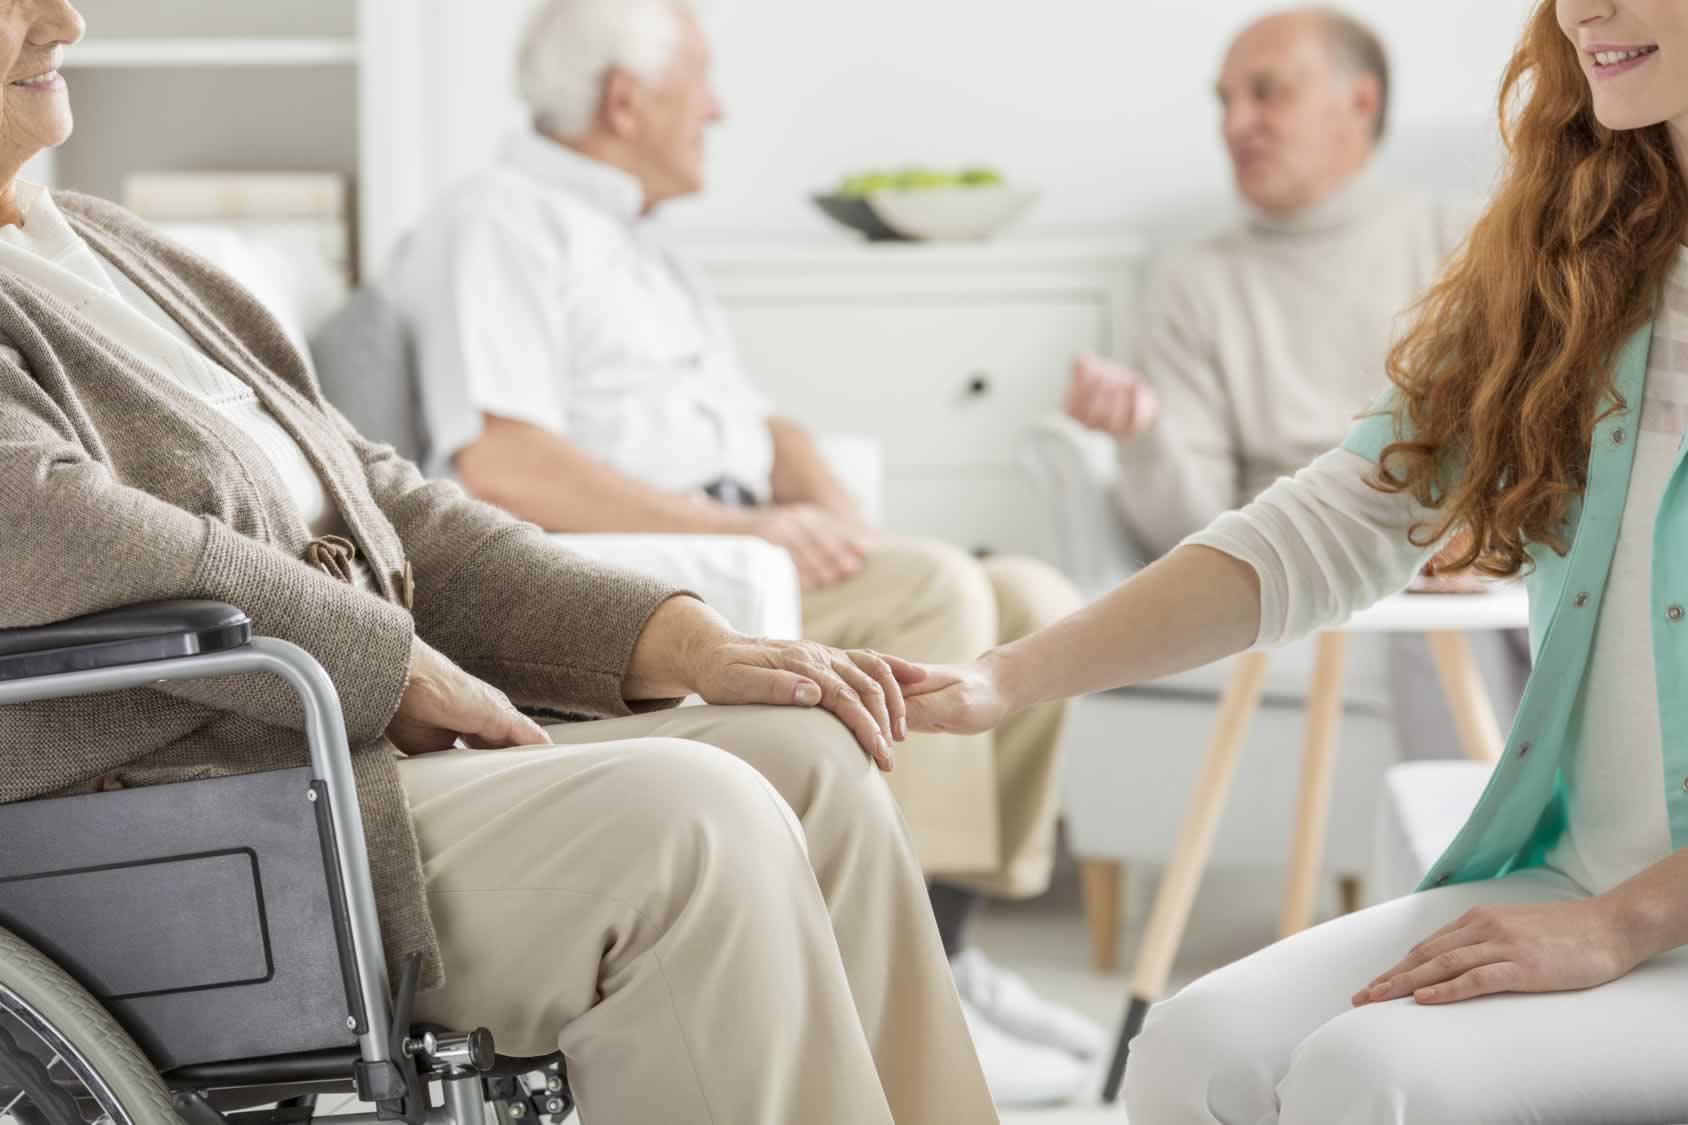 When to hire senior home care services